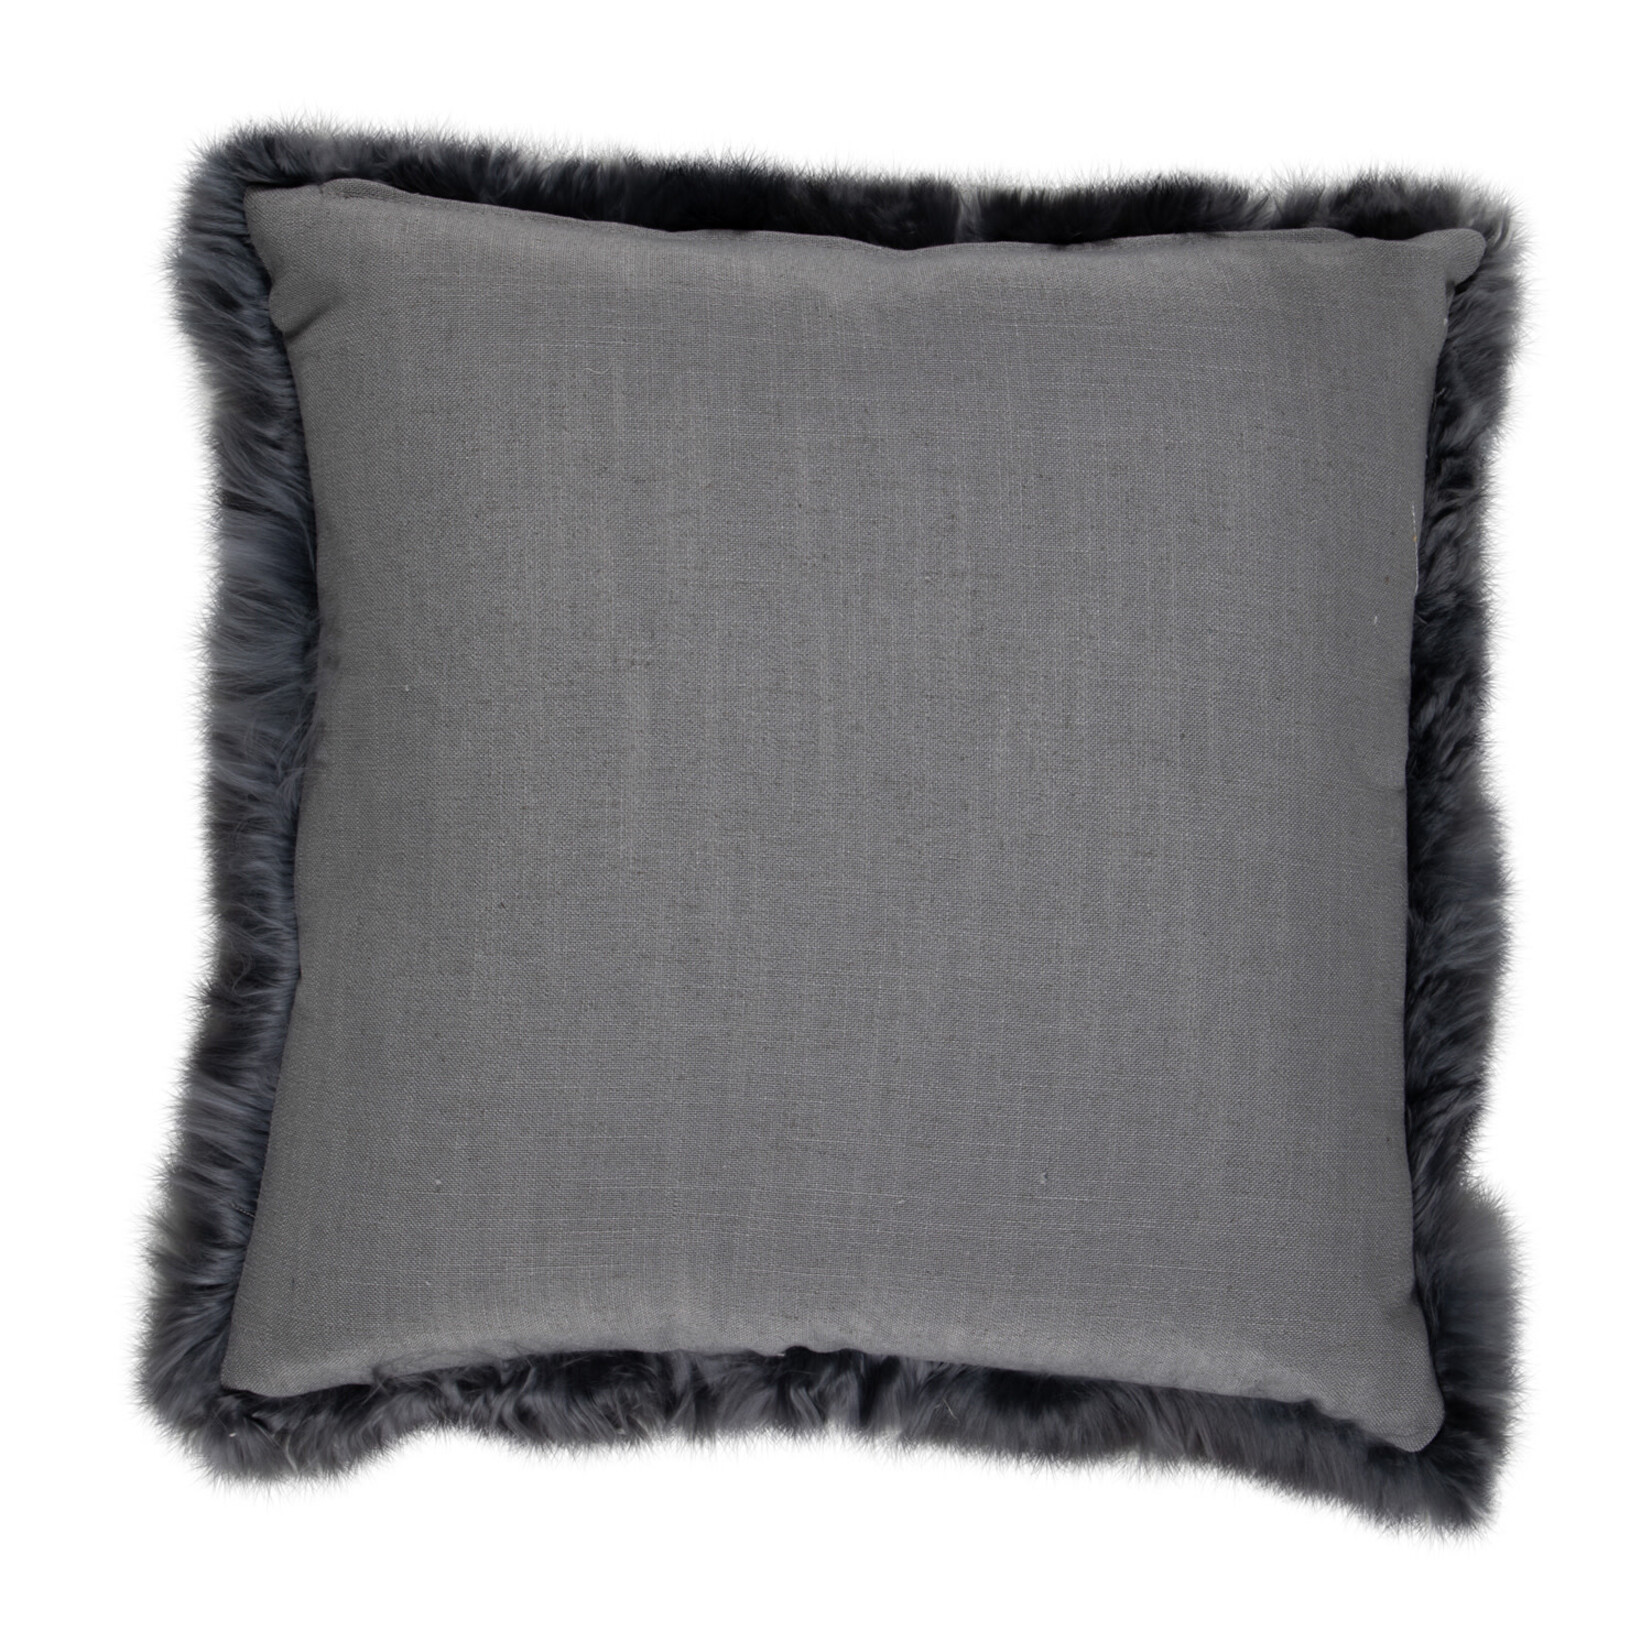 Gabby Alpaca Pillow with Feather Insert 22x22 Gray